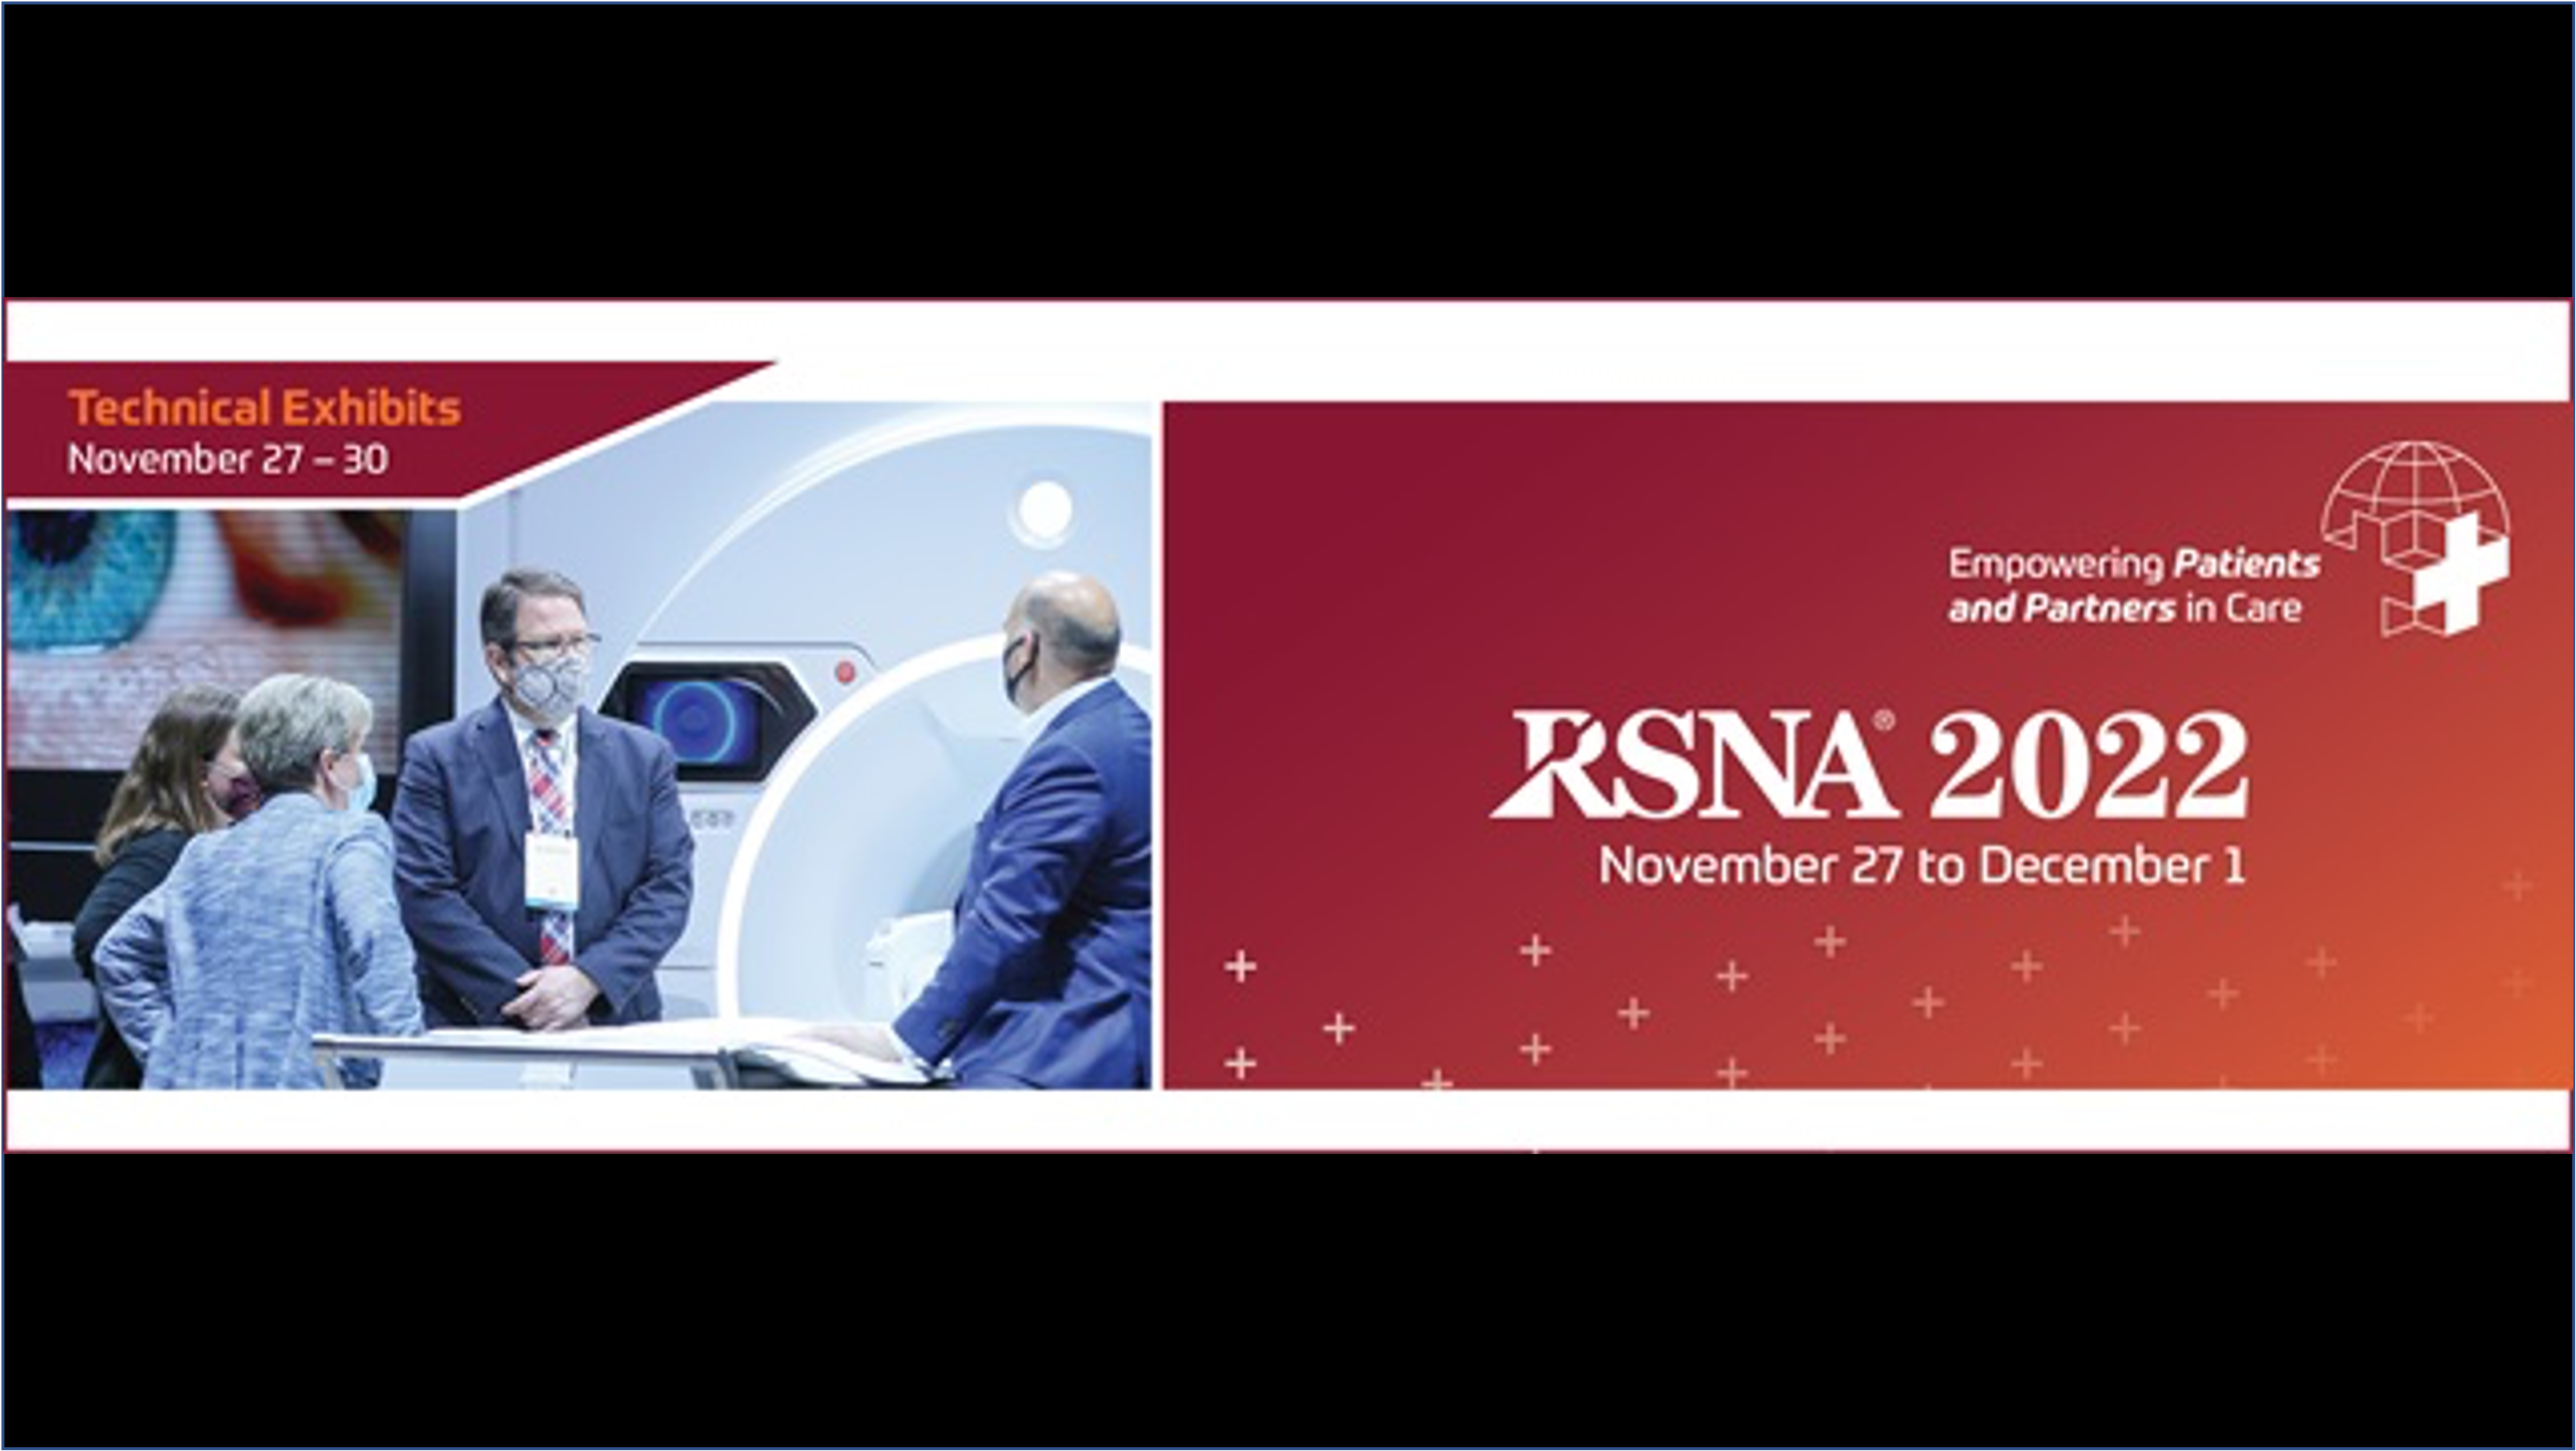 Be Our Guest at RSNA 2022!